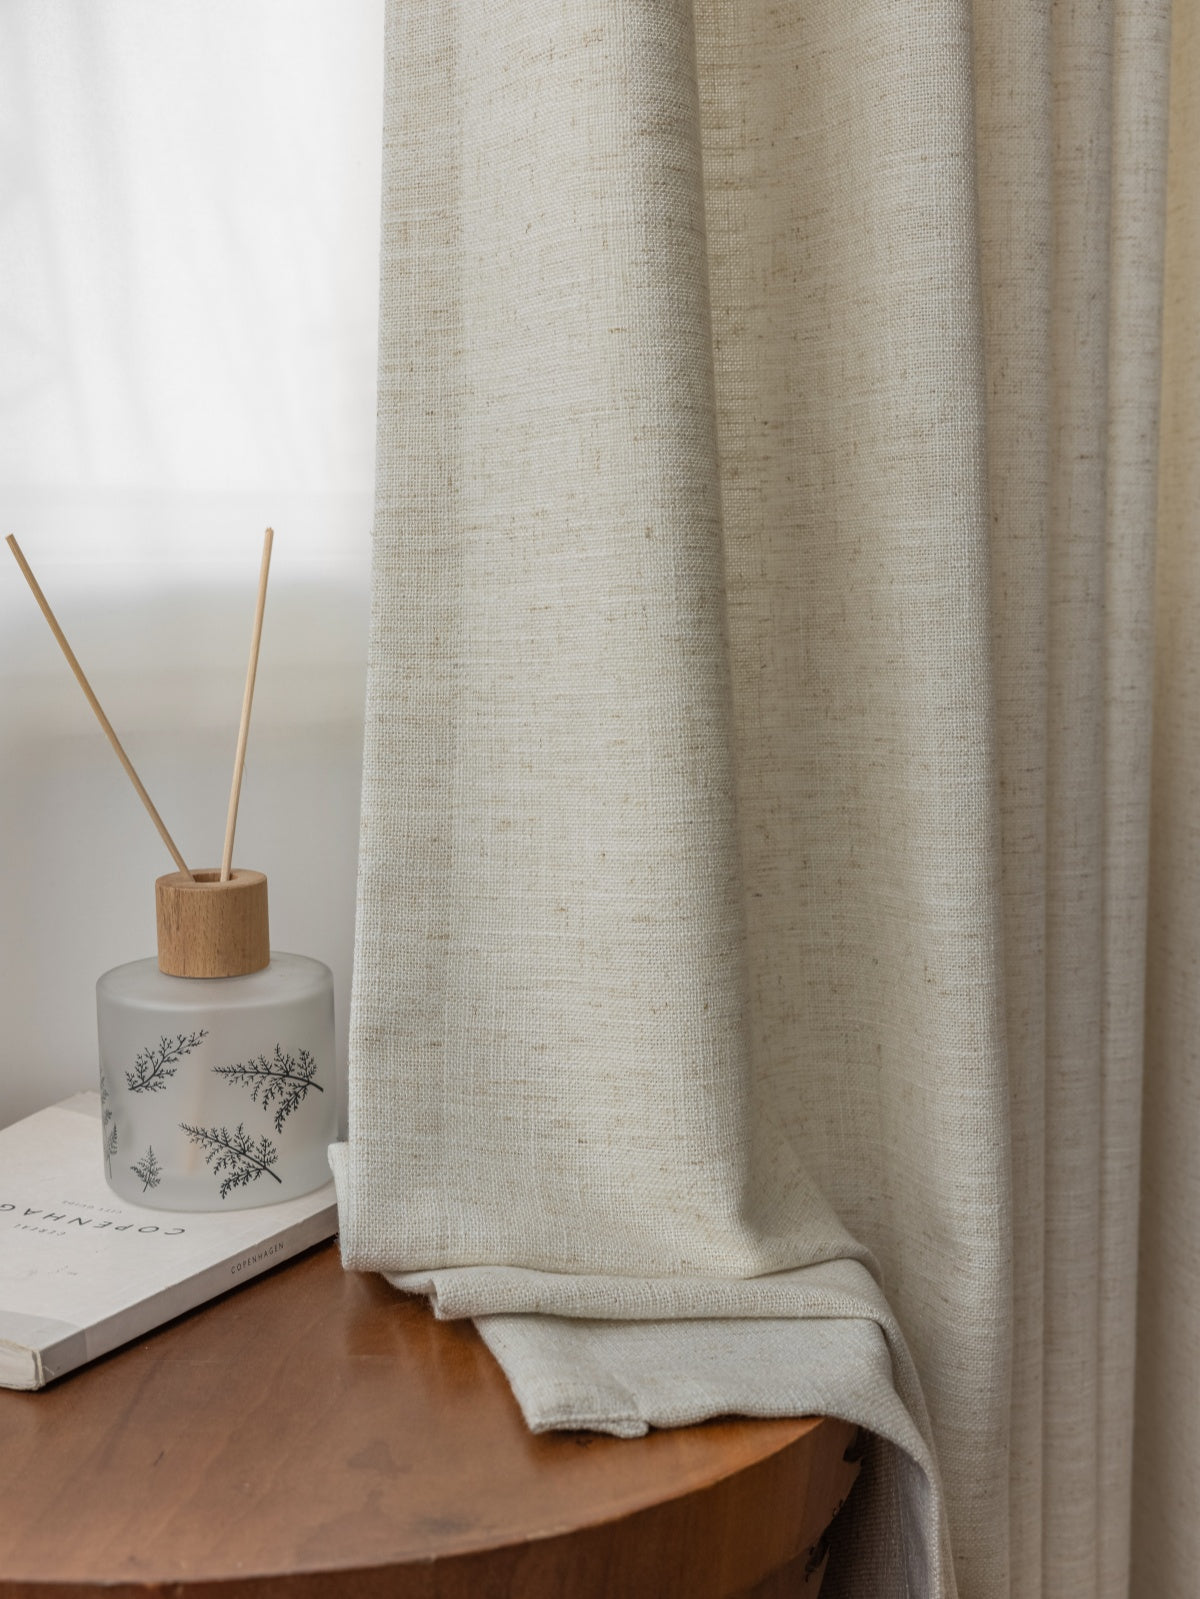 Luxurious white French linen blend drape pleated, enhancing room ambiance with a side table featuring a fragrance diffuser and botanical book